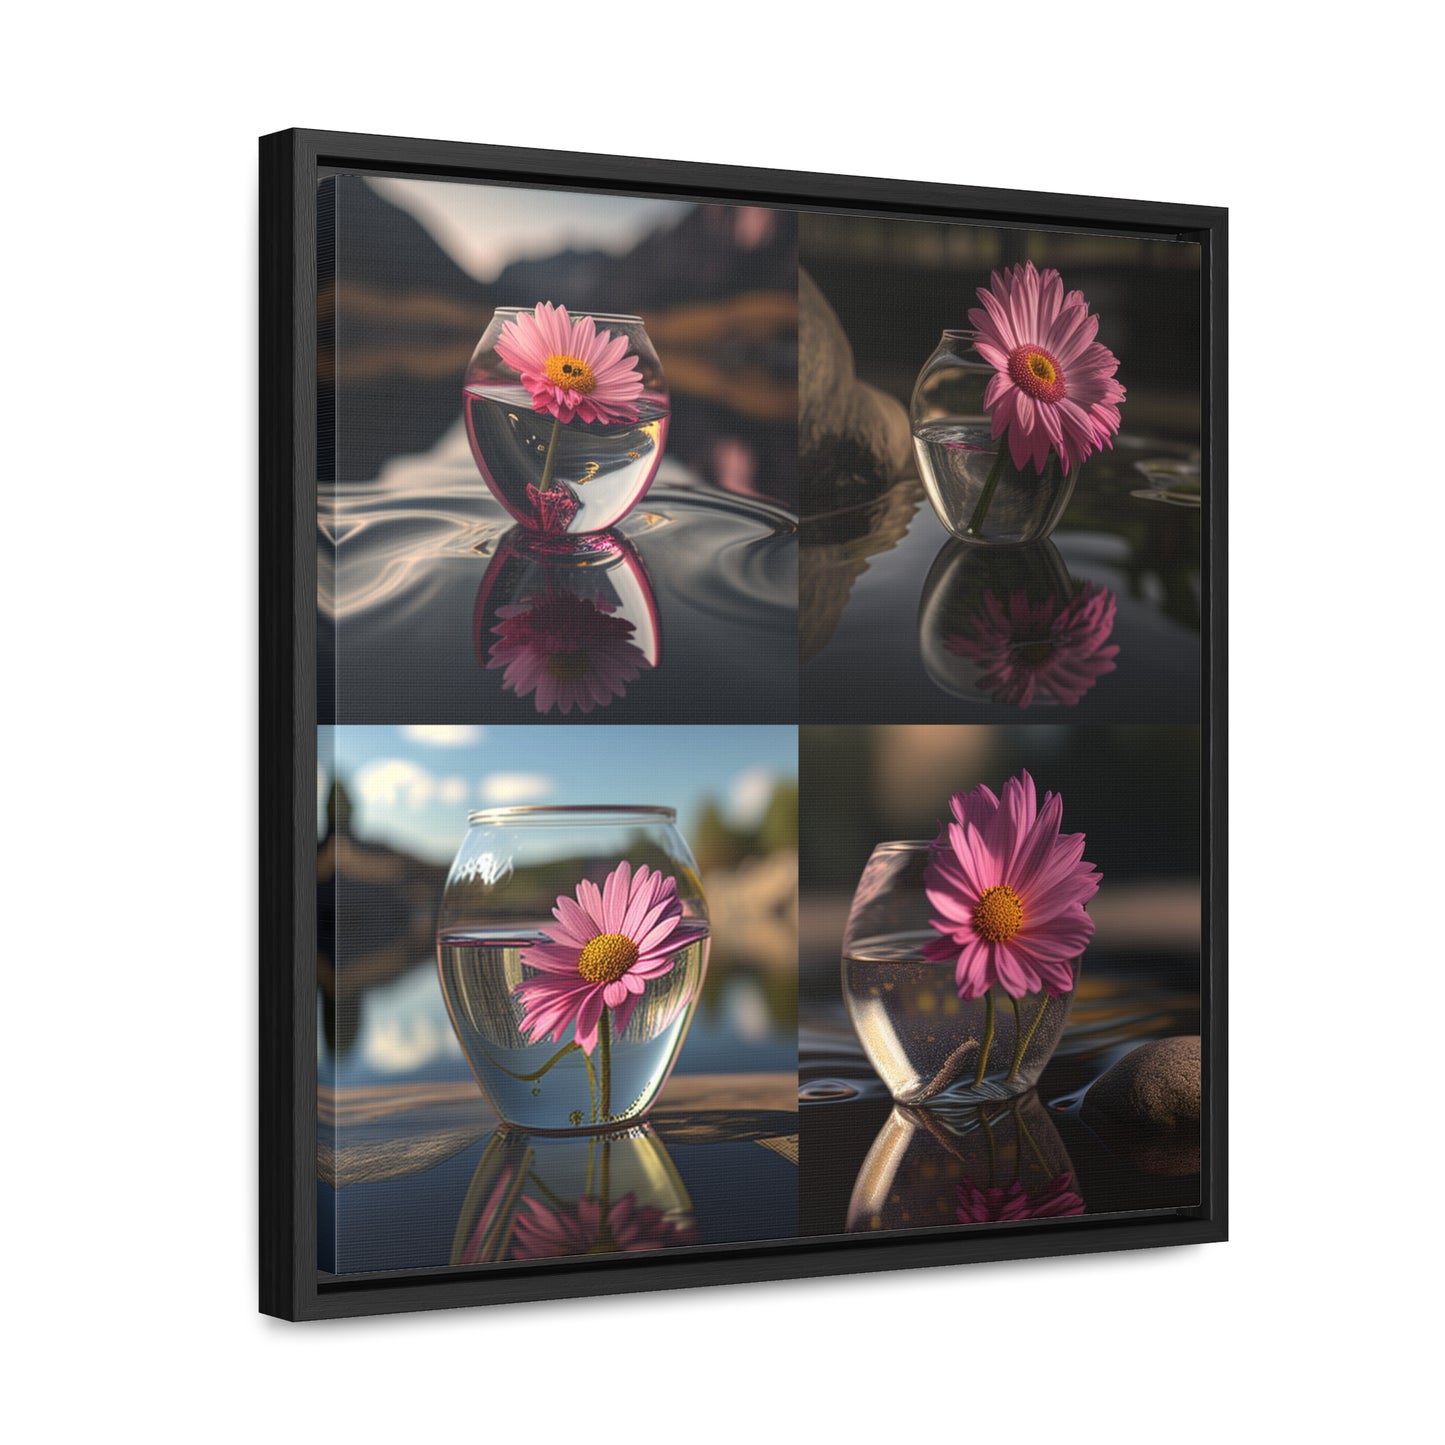 Gallery Canvas Wraps, Square Frame Pink Daisy 5